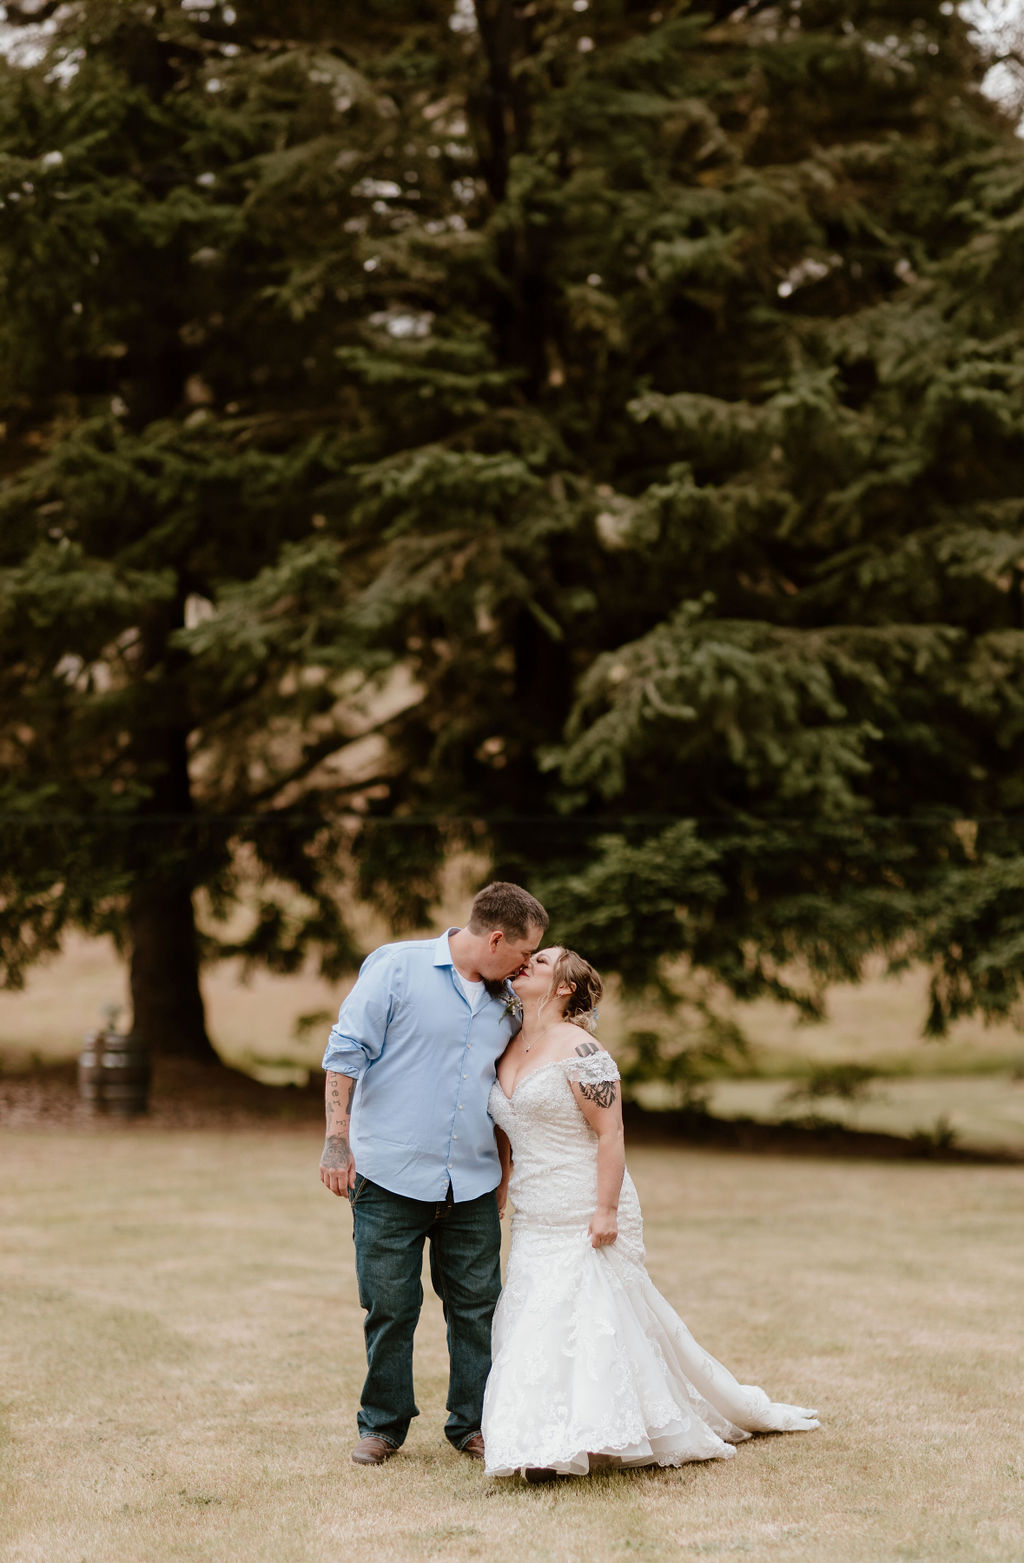 A bride and groom share a kiss outdoors in a serene setting with tall evergreen trees.